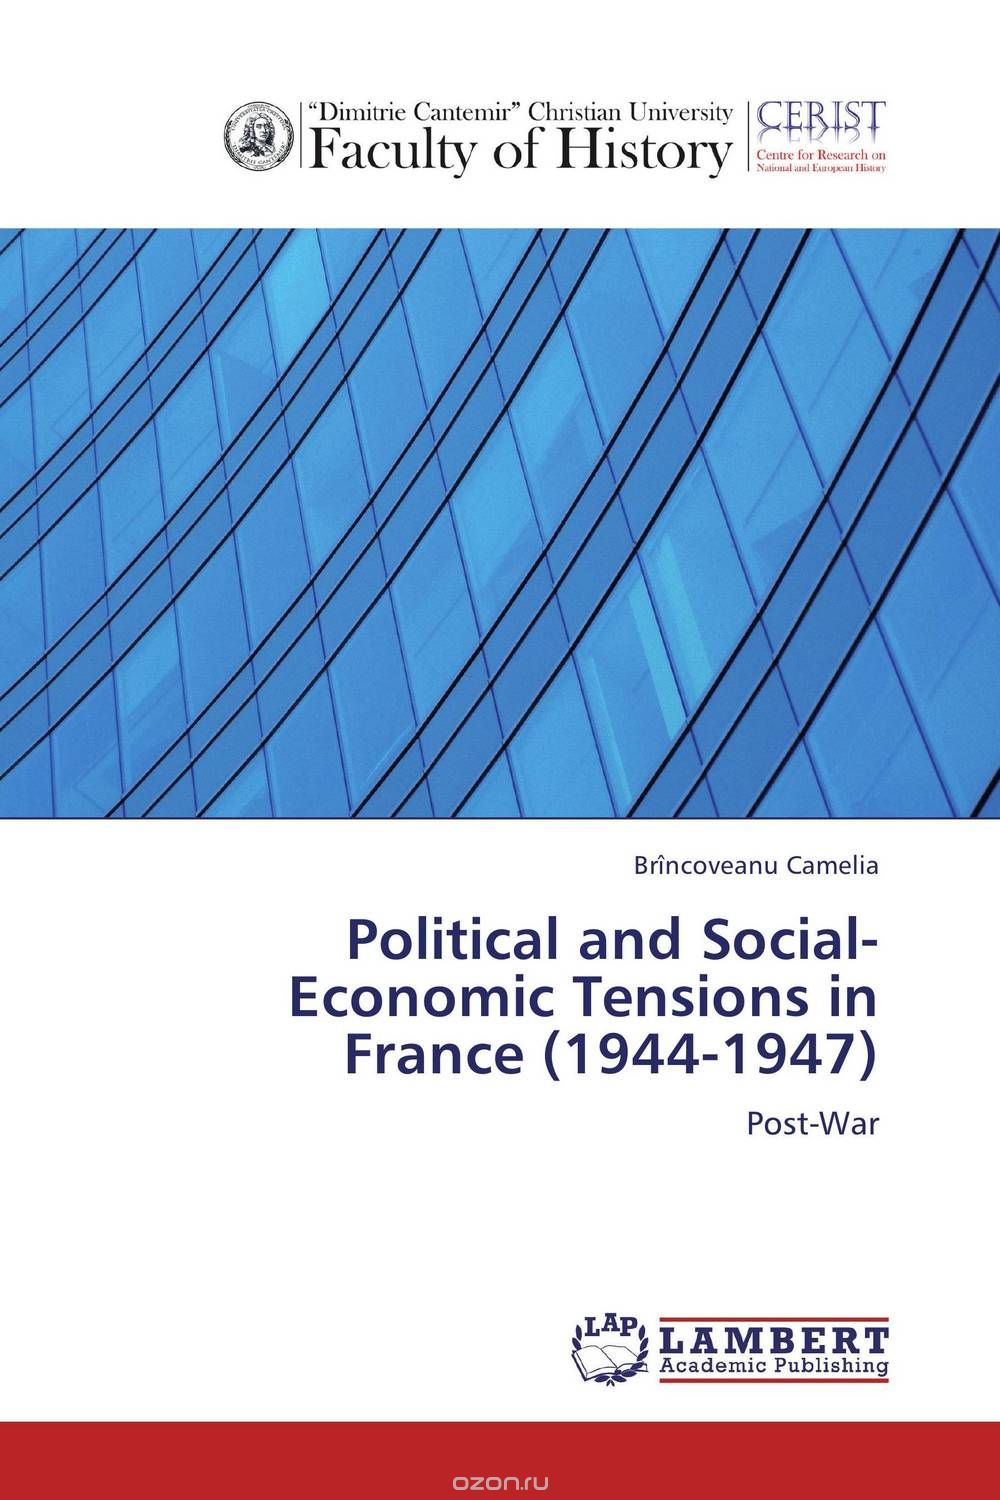 Political and Social-Economic Tensions in France (1944-1947)